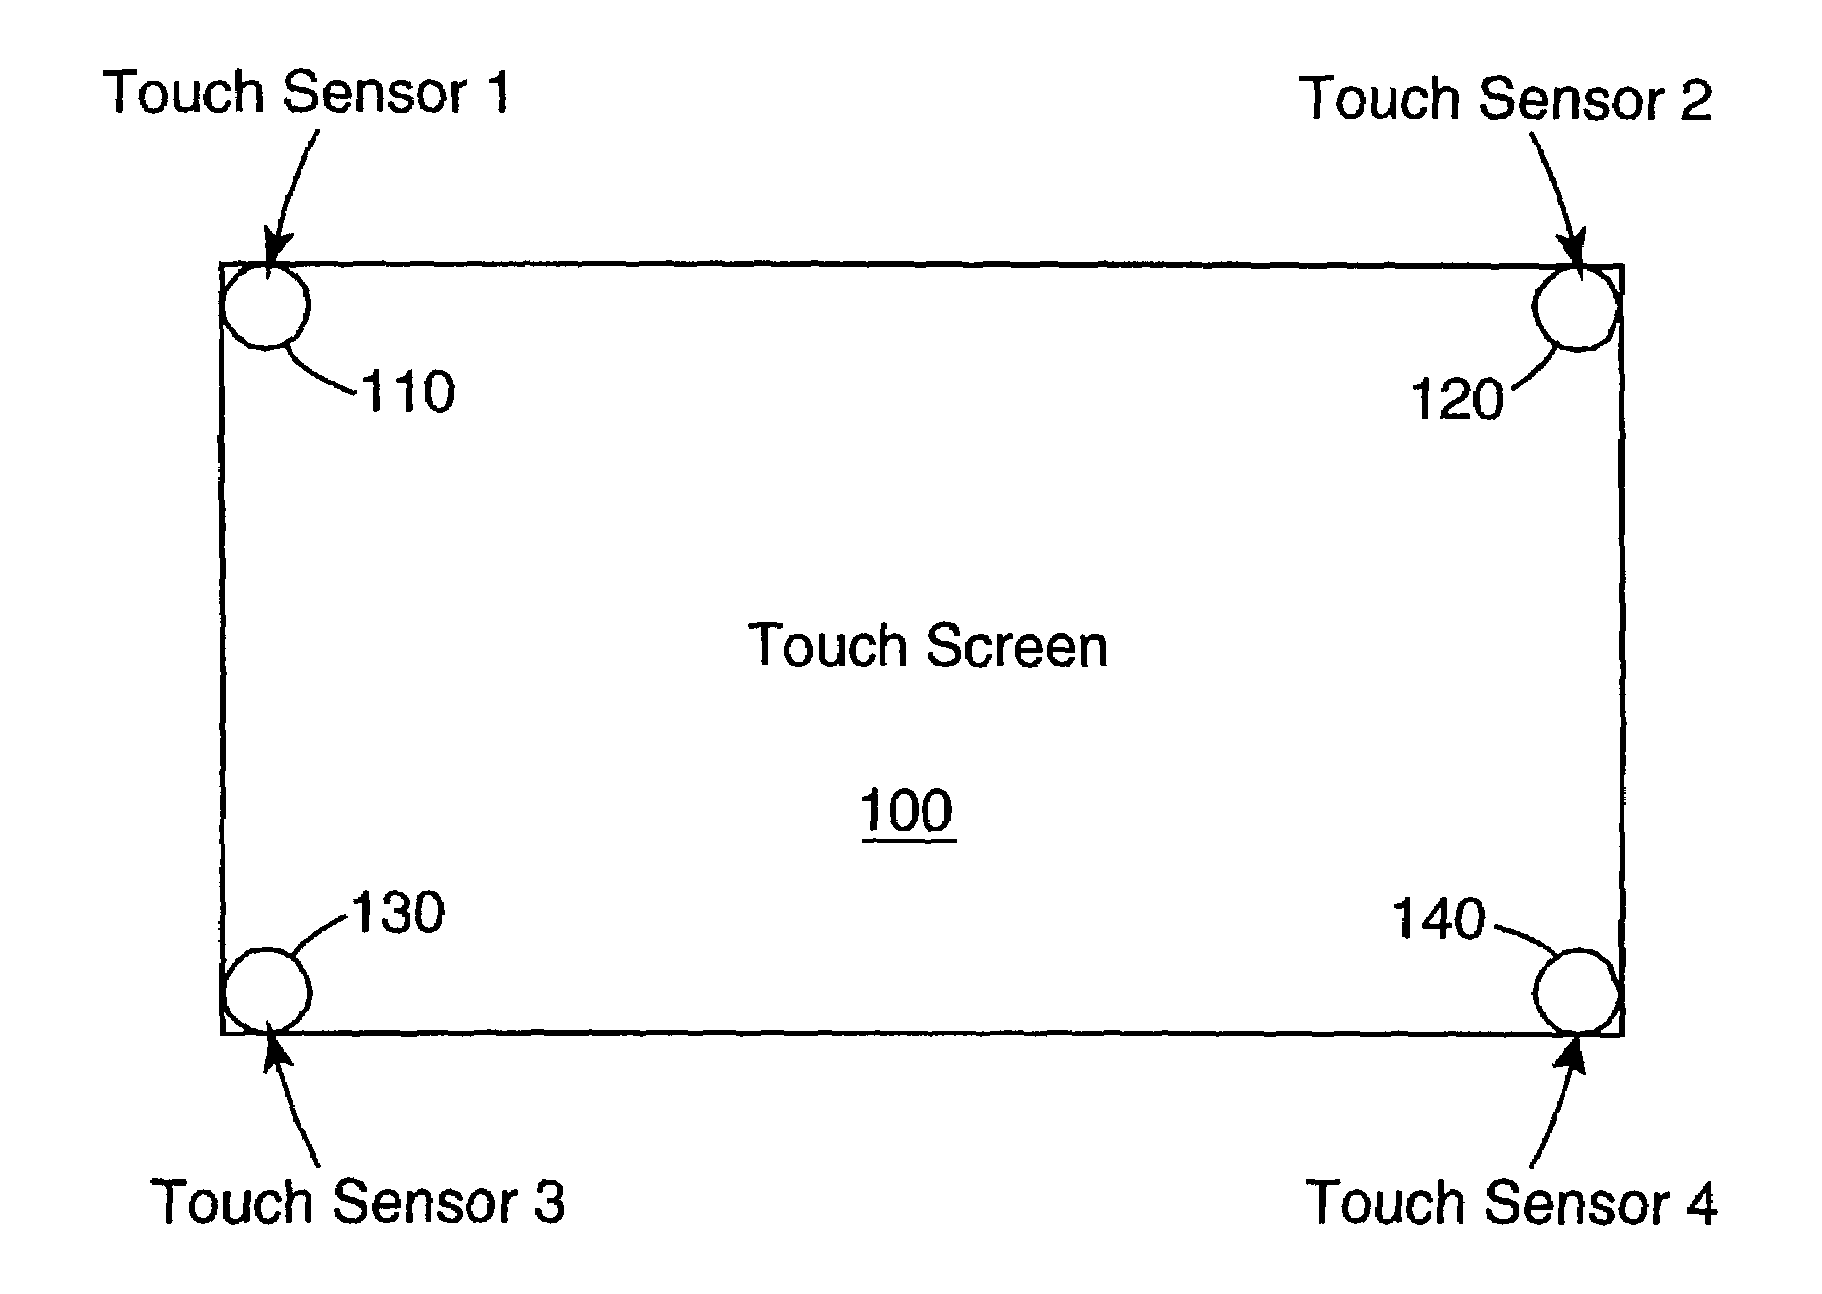 Baselining techniques in force-based touch panel systems